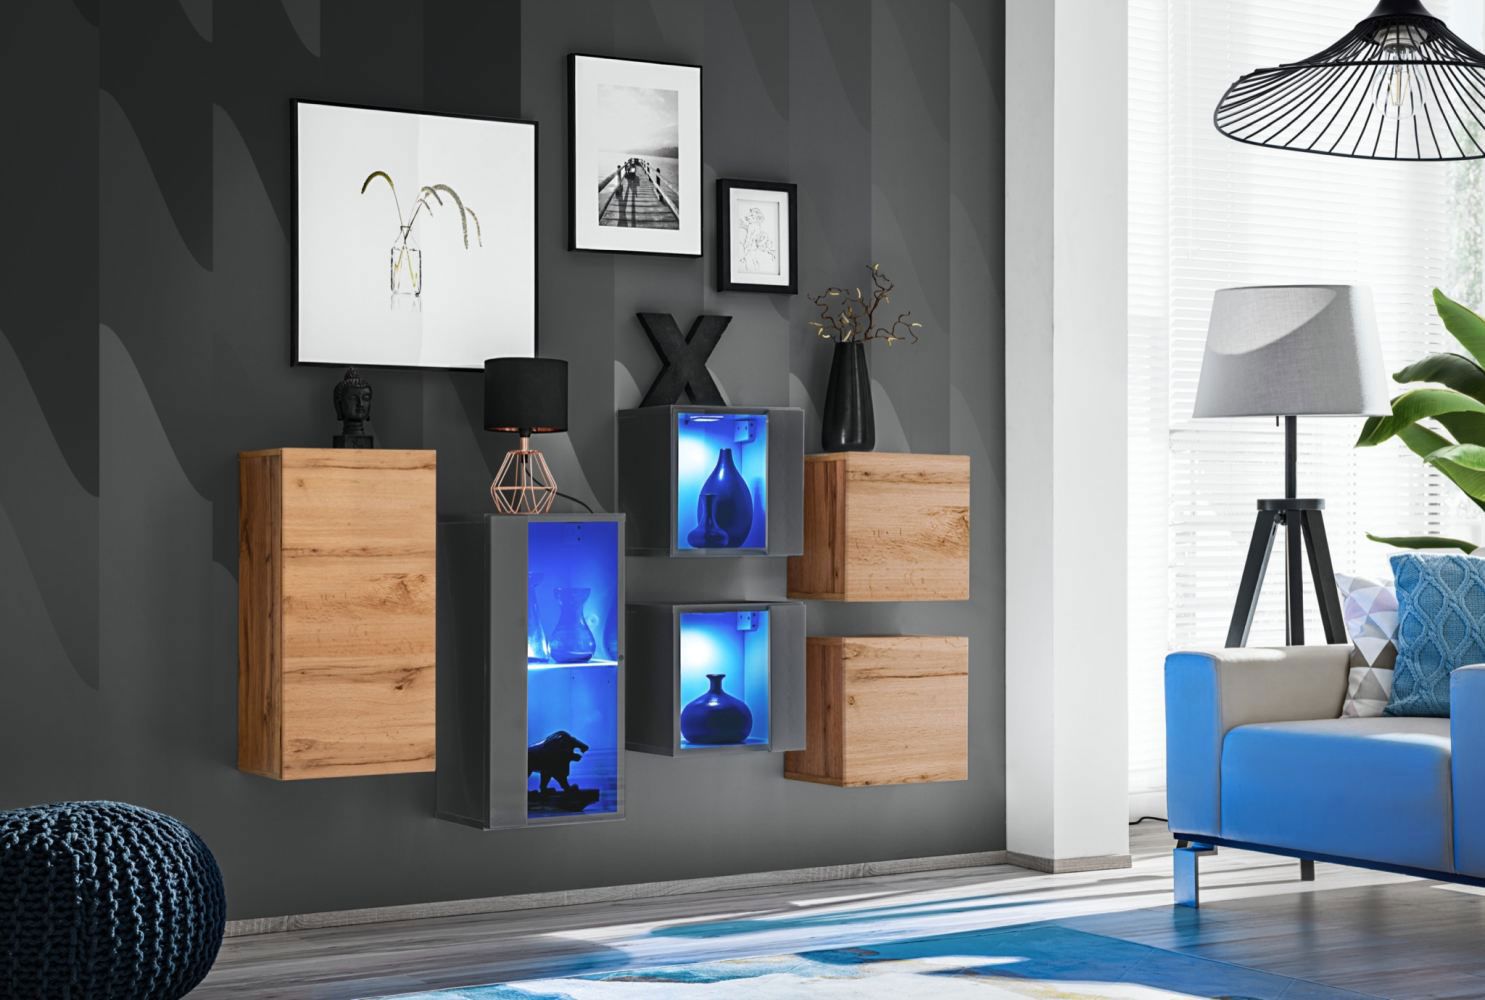 Modern set of wall cabinets / wall cabinets Volleberg 111, color: oak Wotan / grey - dimensions: 80 x 150 x 25 cm (H x W x D), with blue LED lighting